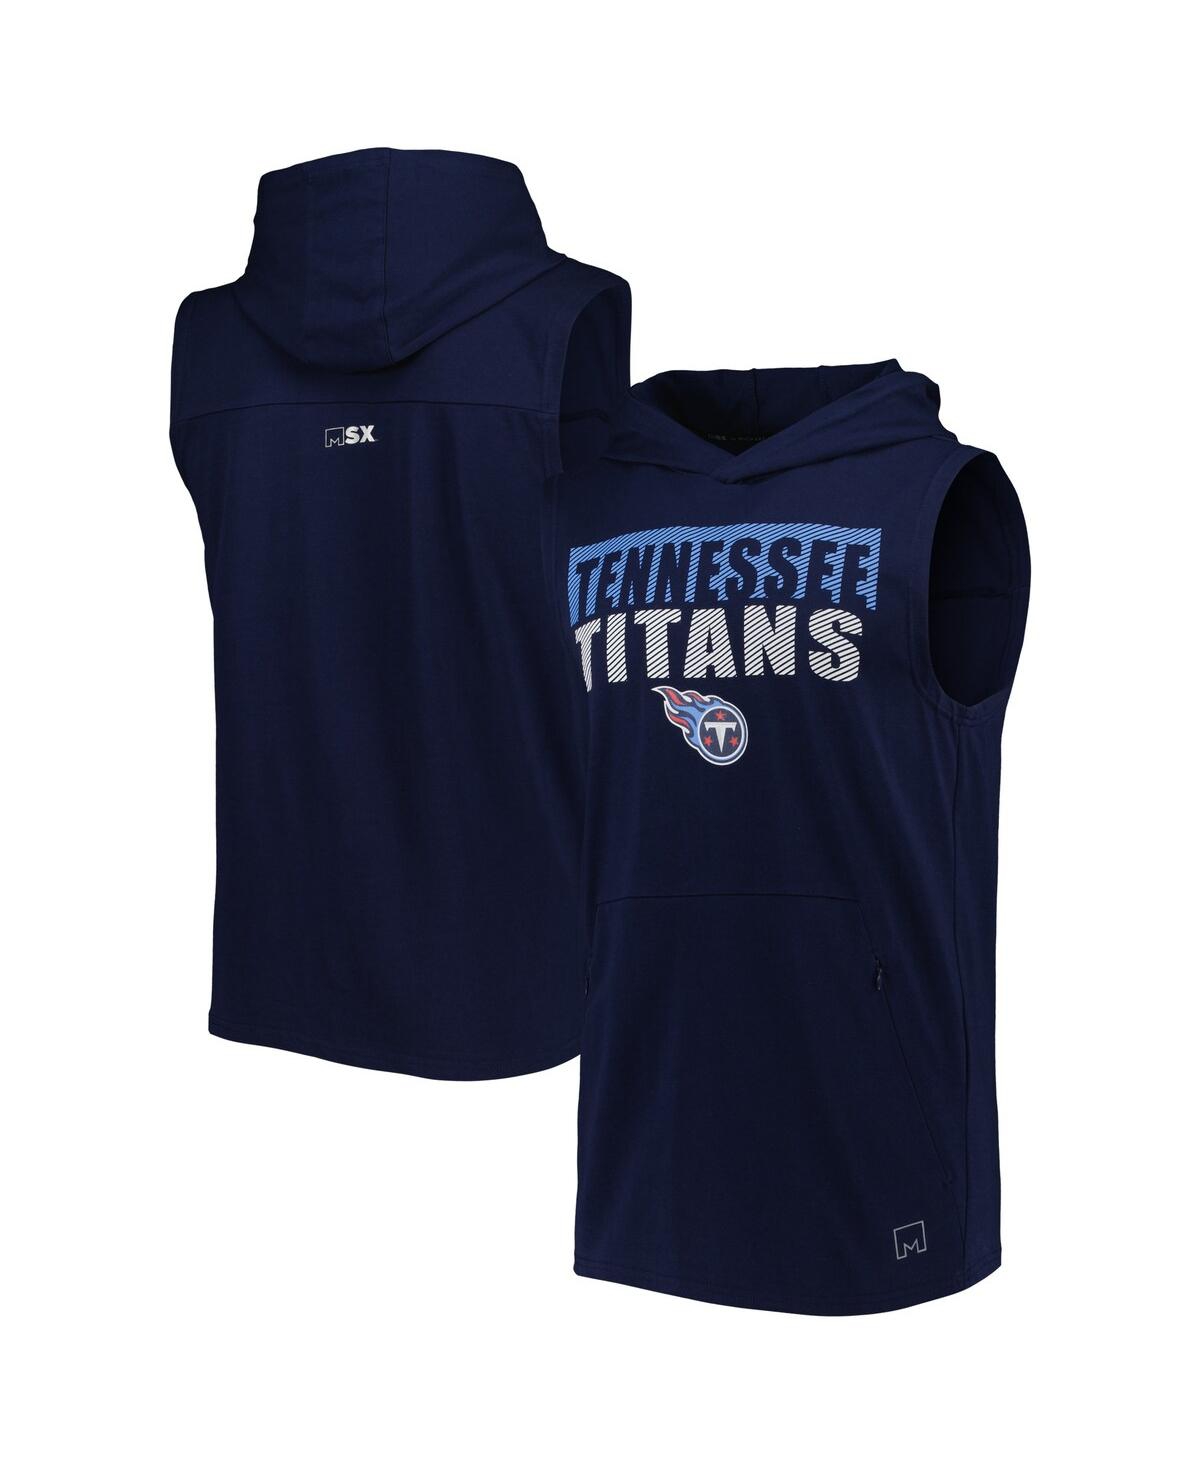 Men's Msx by Michael Strahan Navy Tennessee Titans Relay Sleeveless Pullover Hoodie - Navy